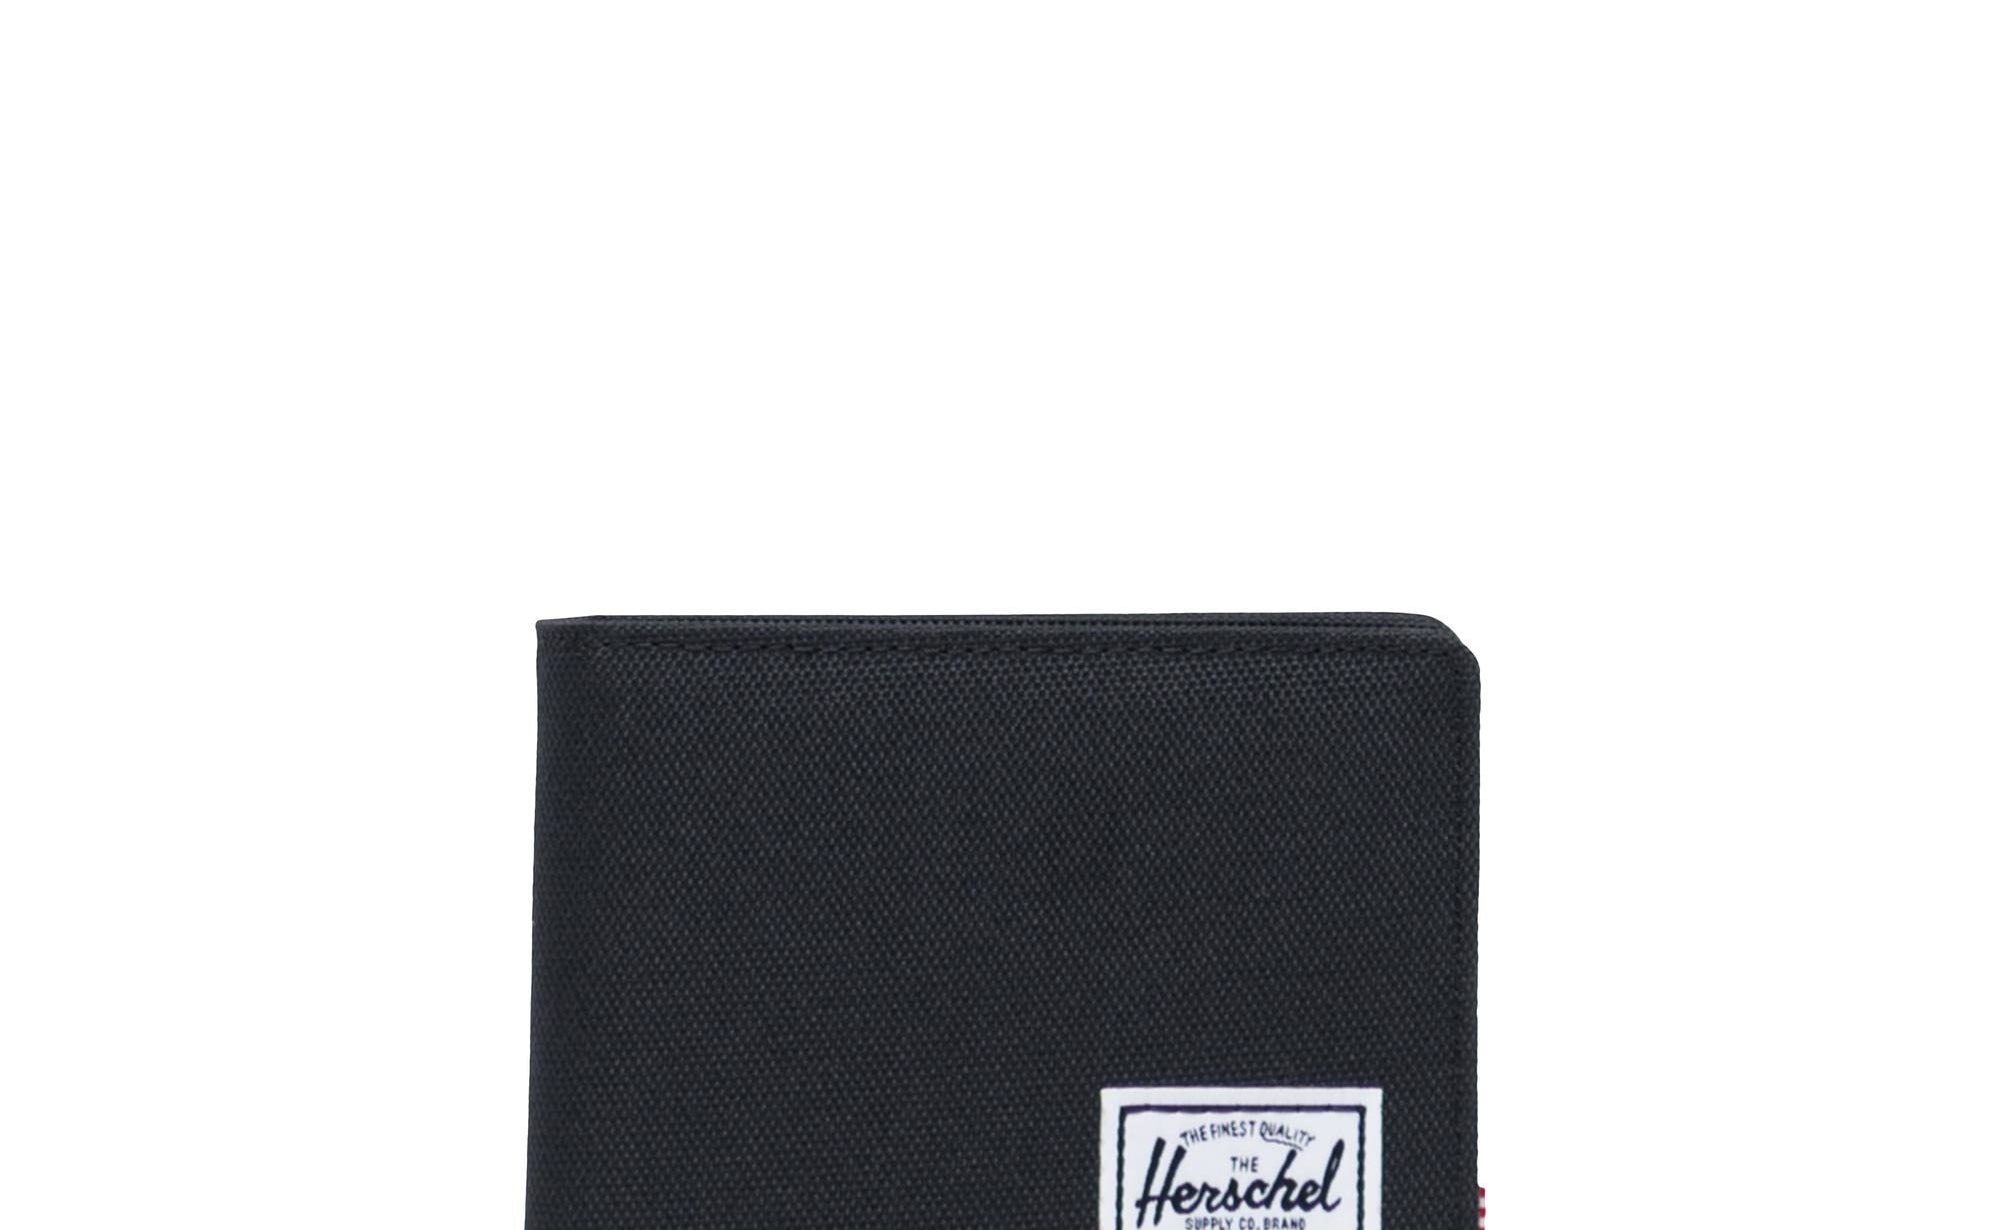 A wallet on a plain background